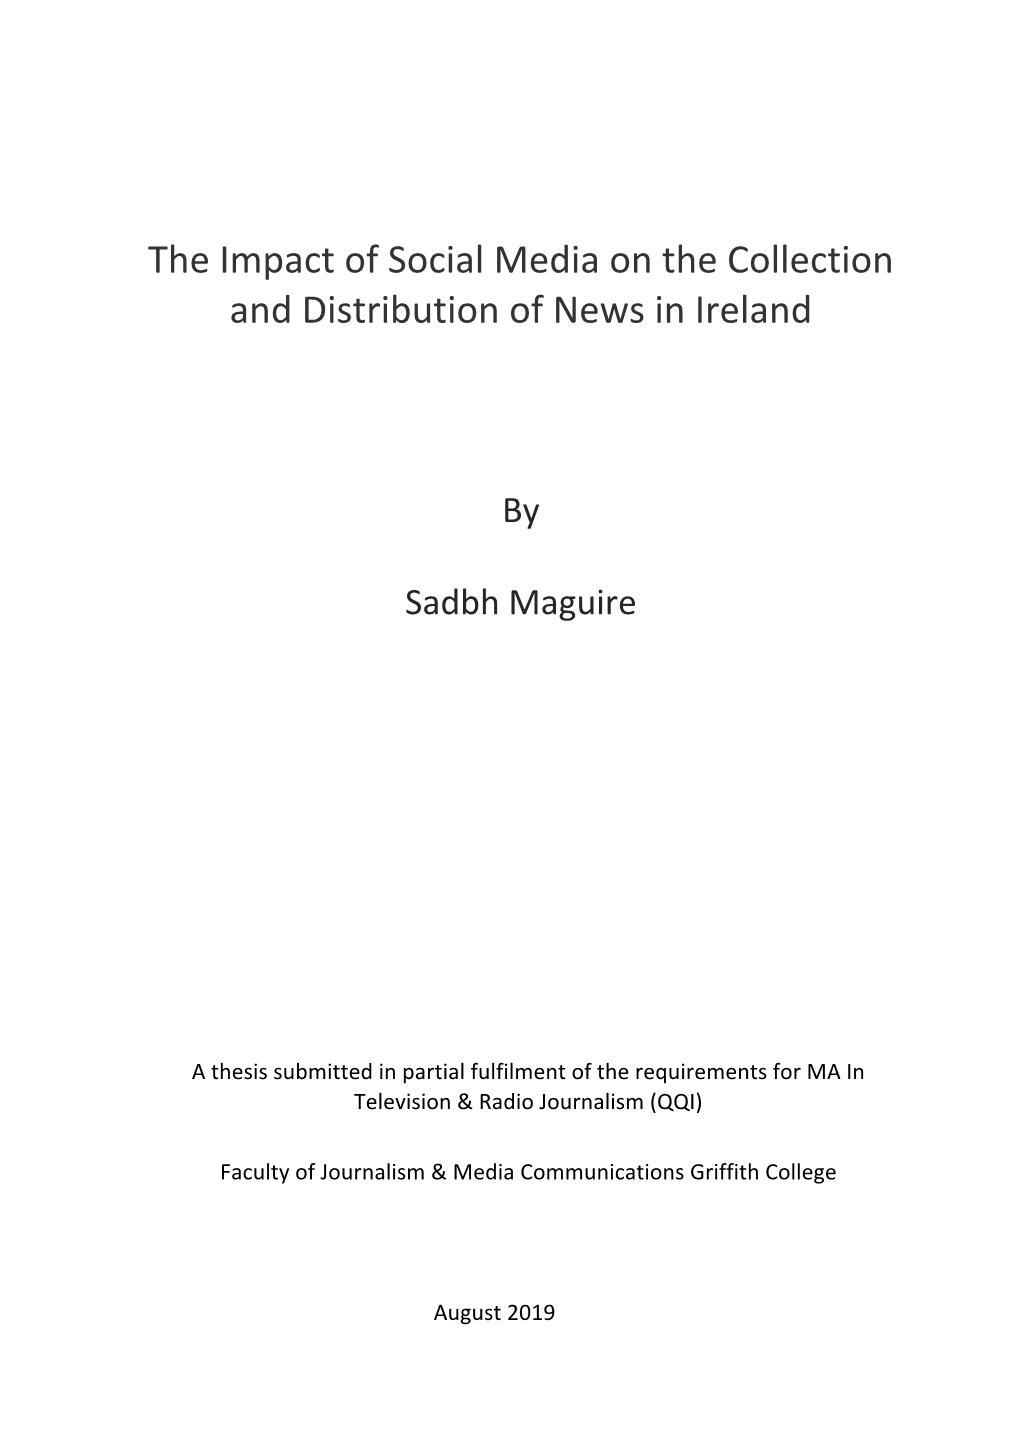 The Impact of Social Media on the Collection and Distribution of News in Ireland